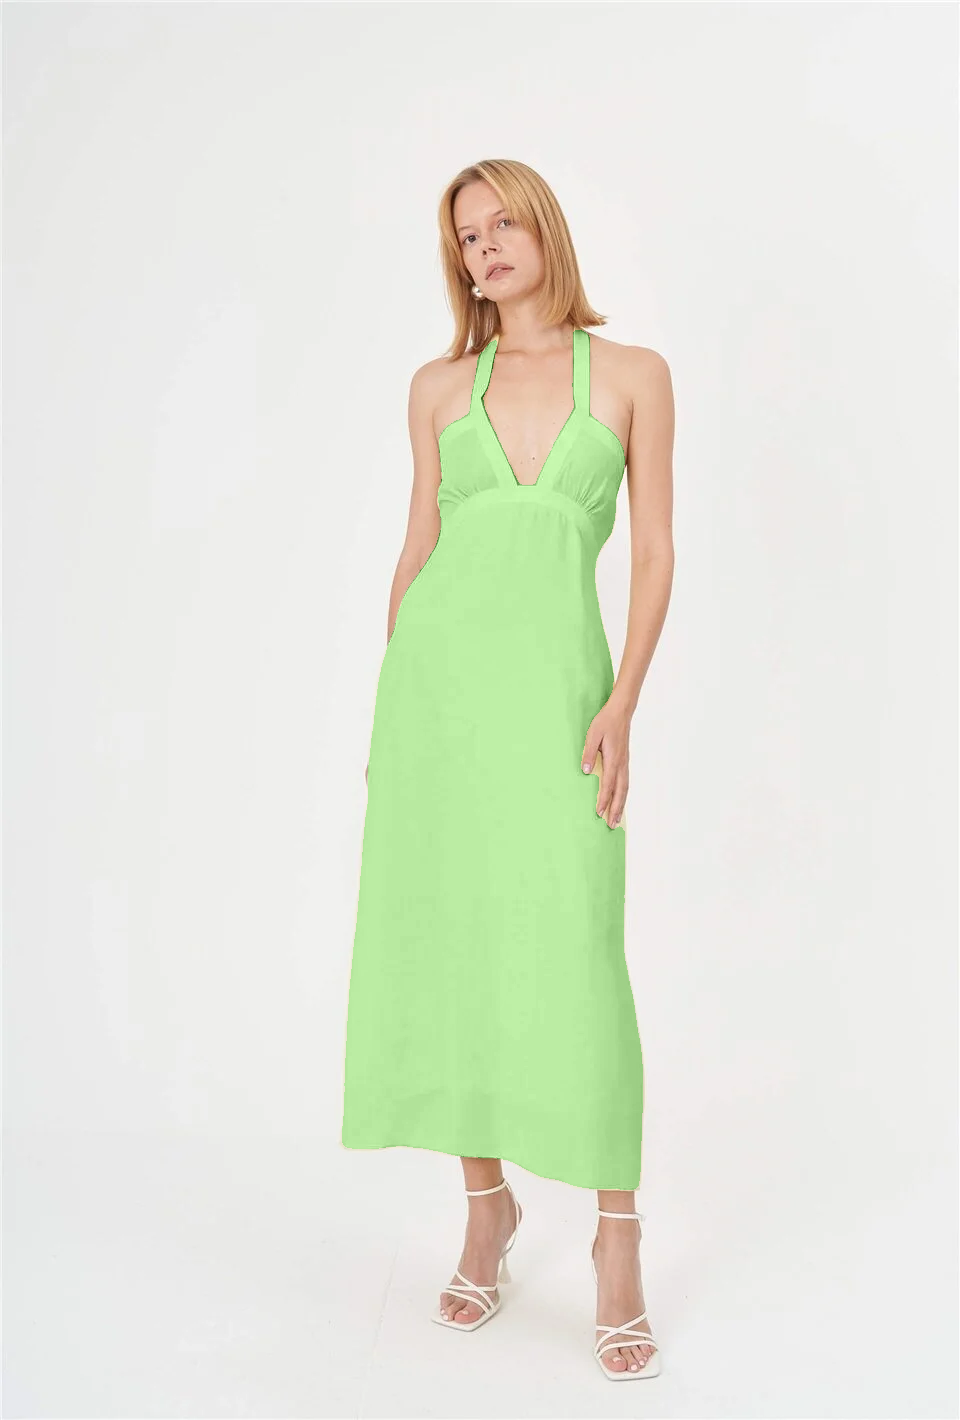 A vibrant green summer dress with a halter neck, made from lightweight cotton fabric. The dress is perfect for various occasions, including beach outings, pool parties, casual gatherings, and street style during hot summer days